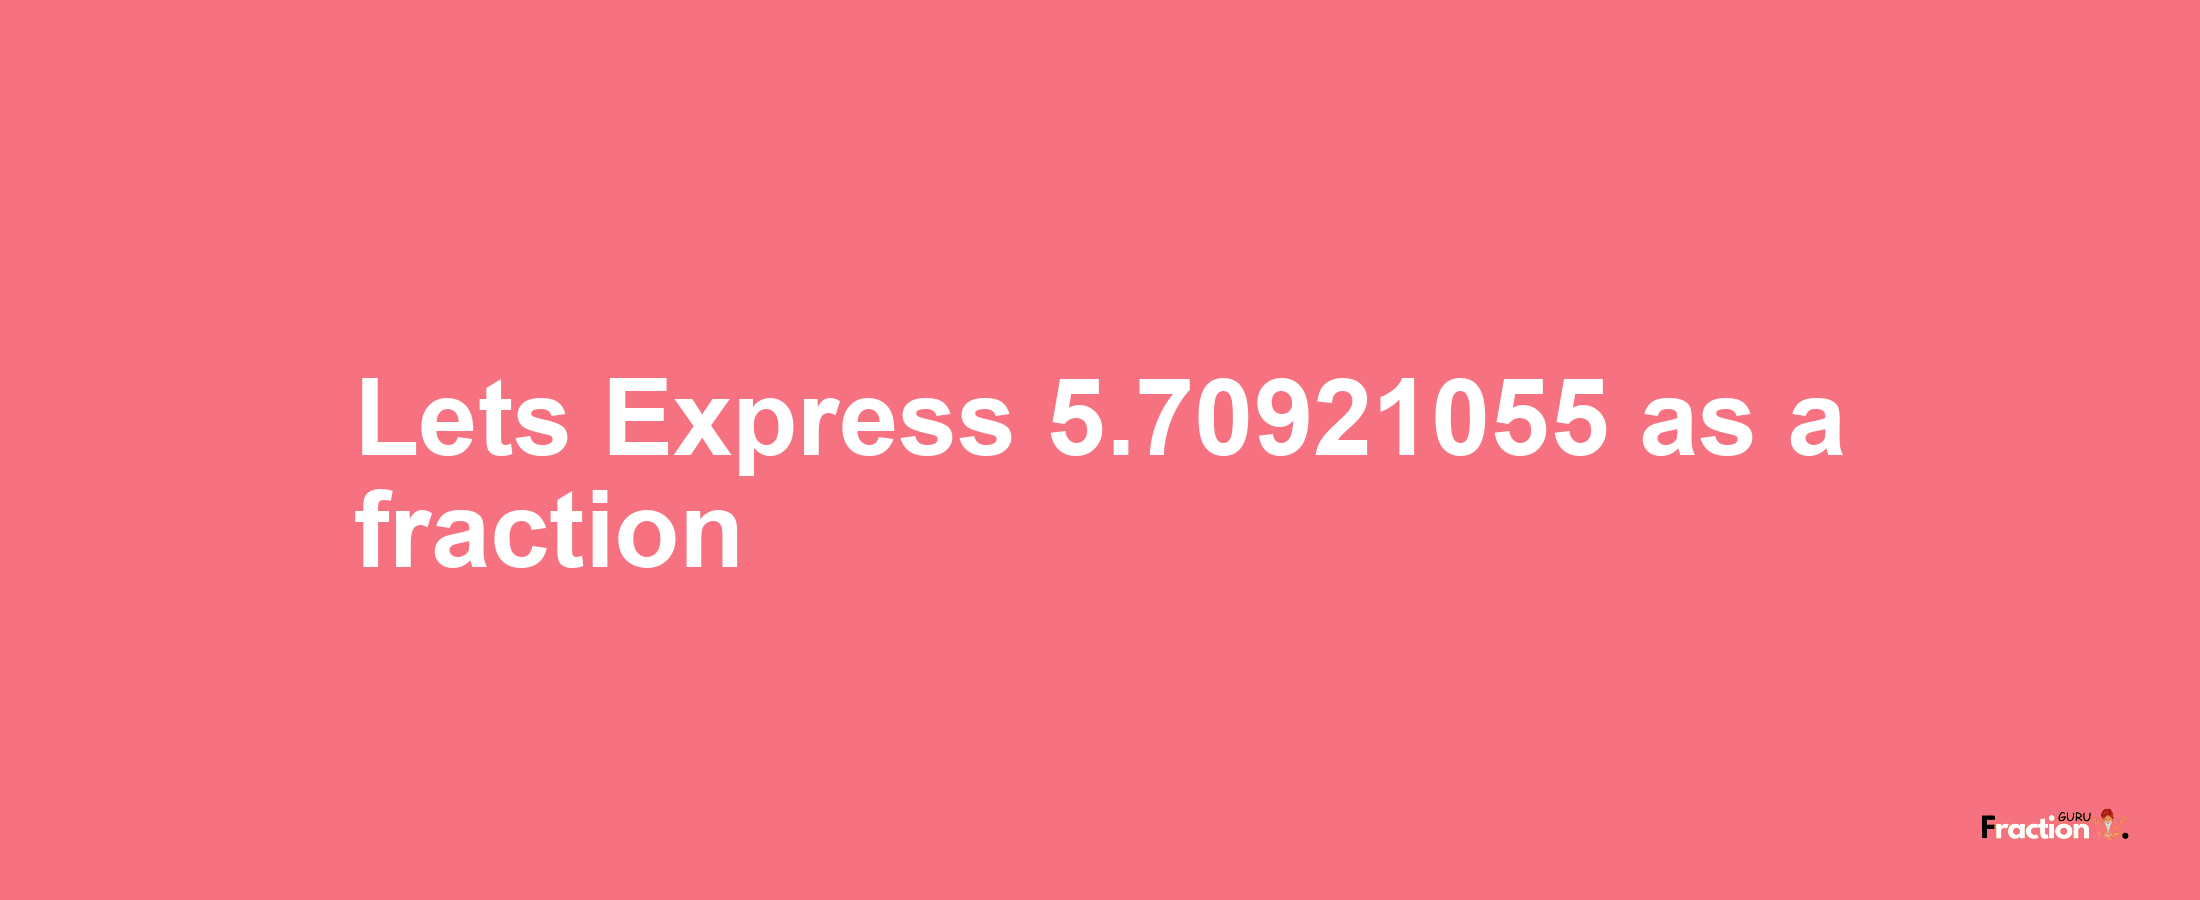 Lets Express 5.70921055 as afraction